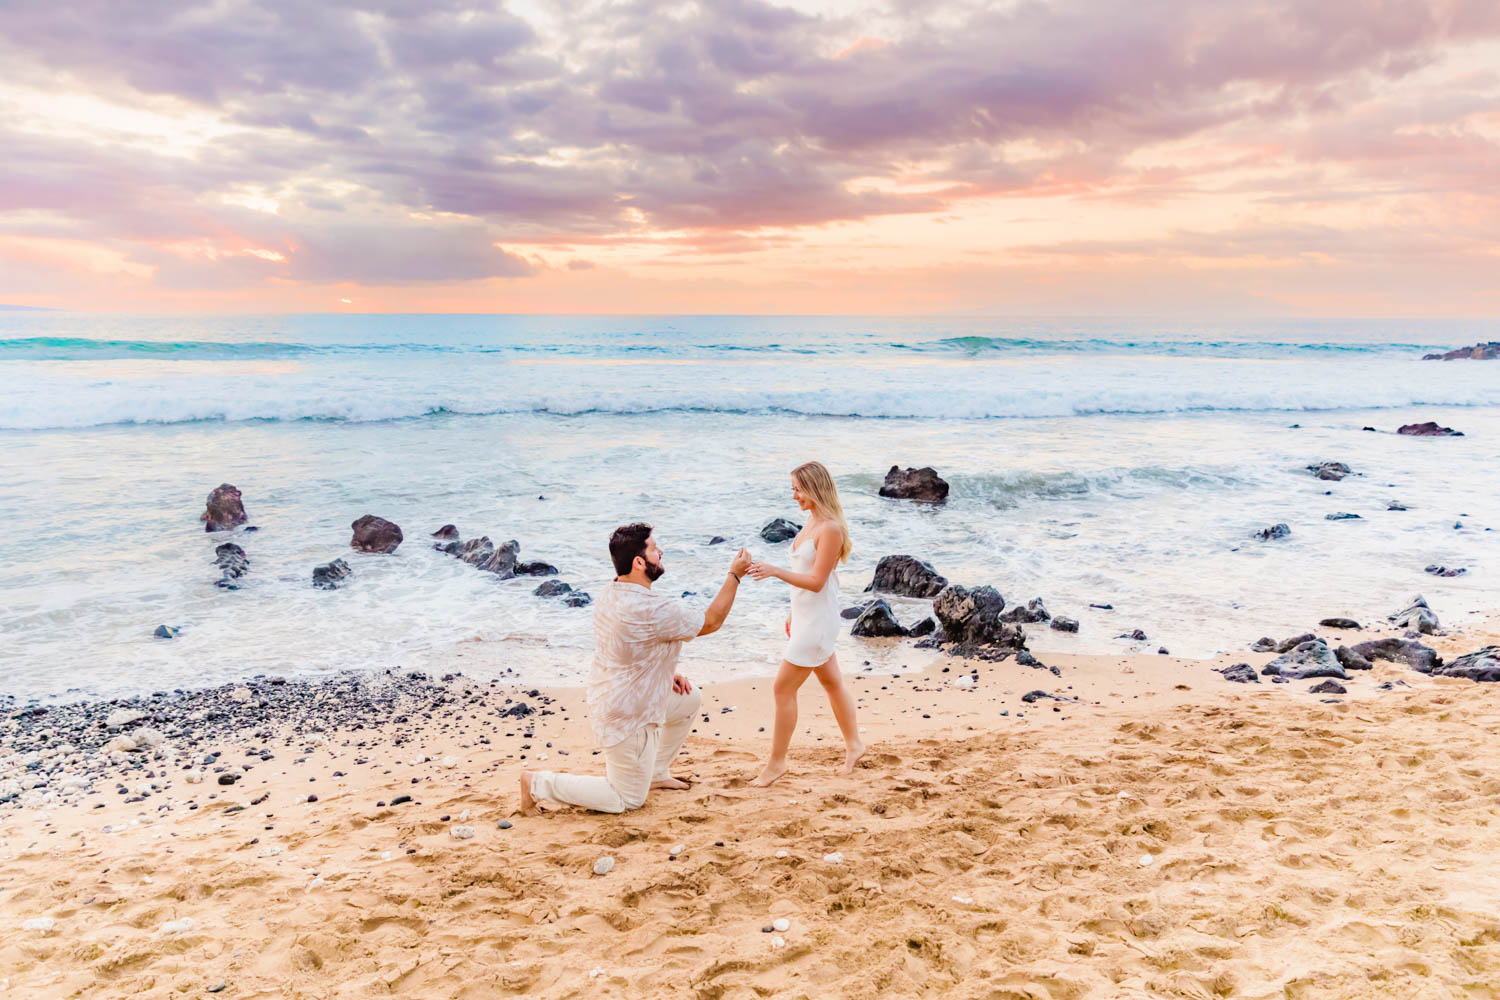 A man gets down on one knee in front of his partner for a beach proposal on Maui, while the moment is captured by Love + Water Photography.